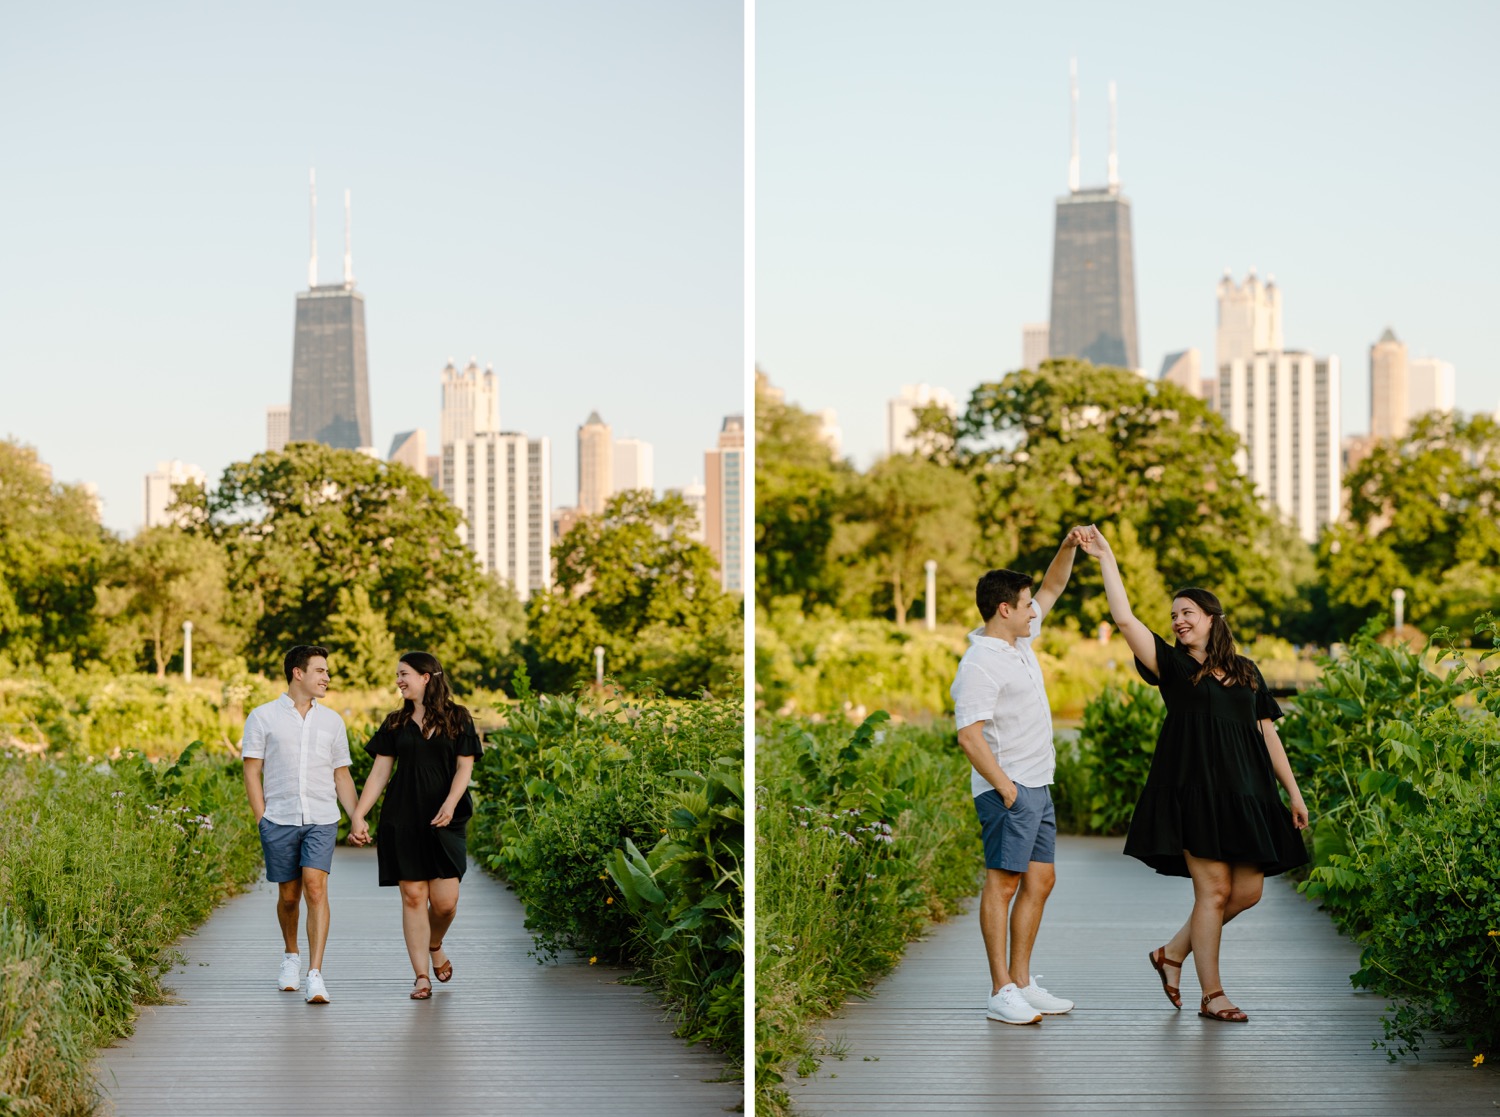 Nature Boardwalk at Lincoln Park Zoo Engagement